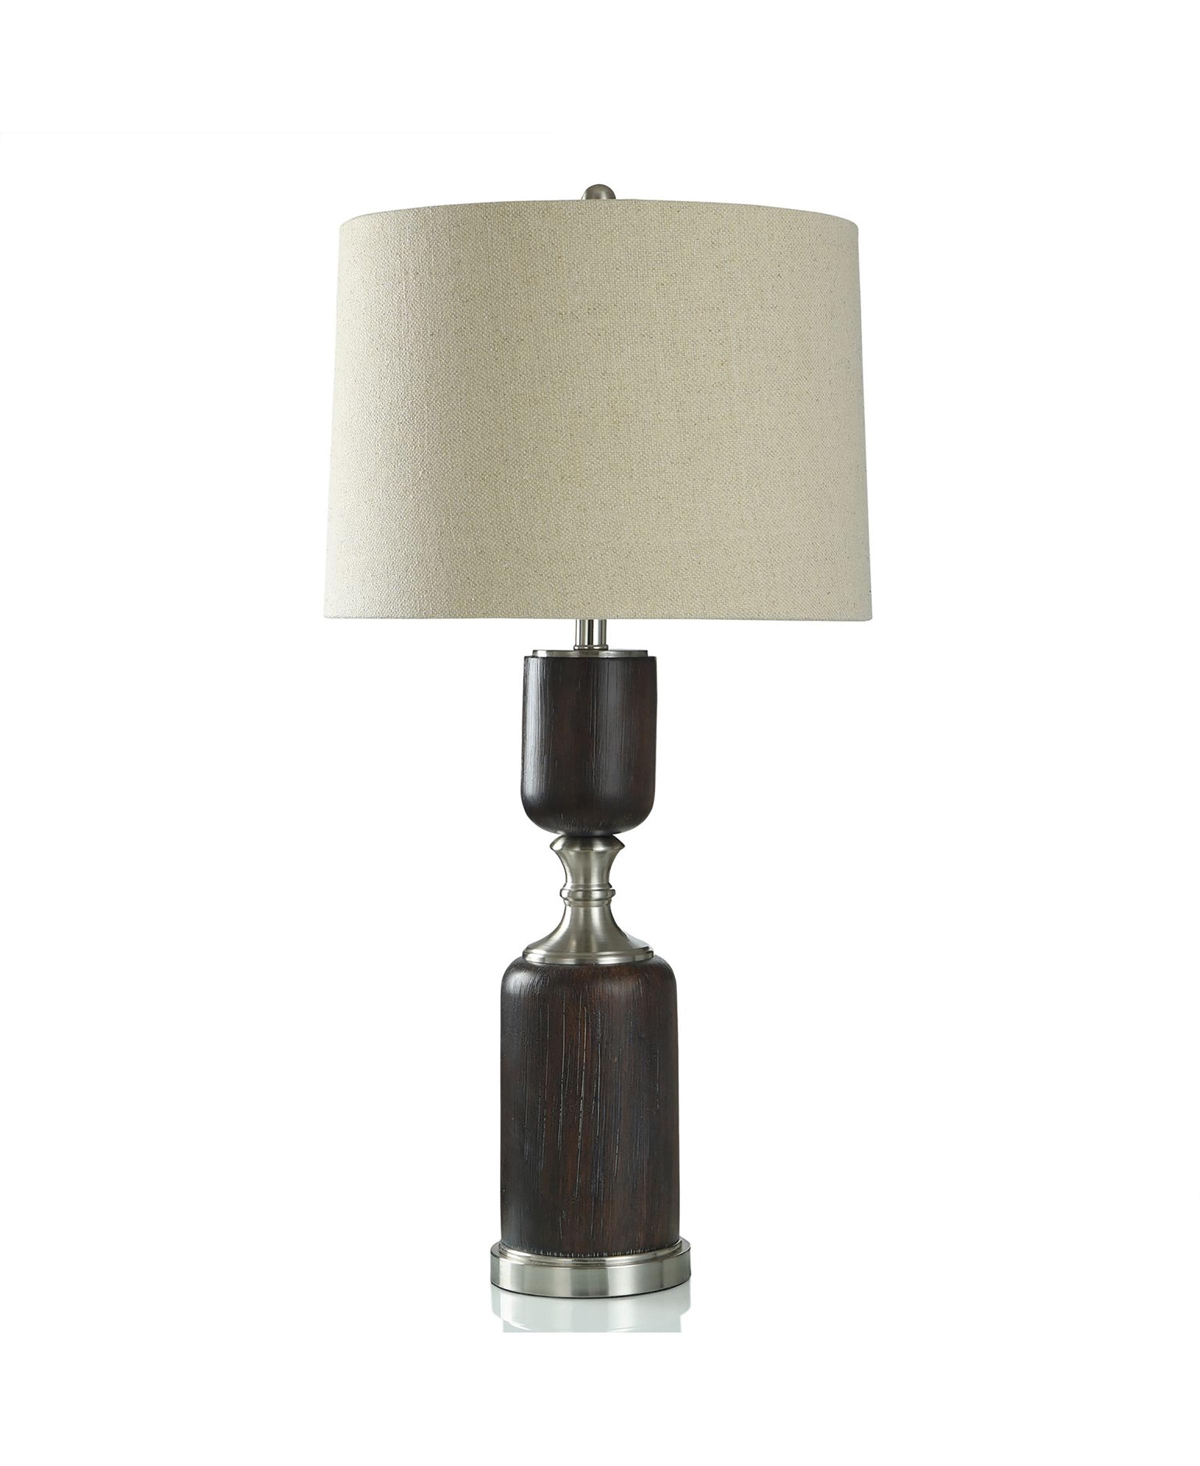 Stylecraft Home Collection 34" Wood Bridge Silver-tone Mid-century Modern Faux Wood Table Lamp In Faux Dark Wood,nickel Base